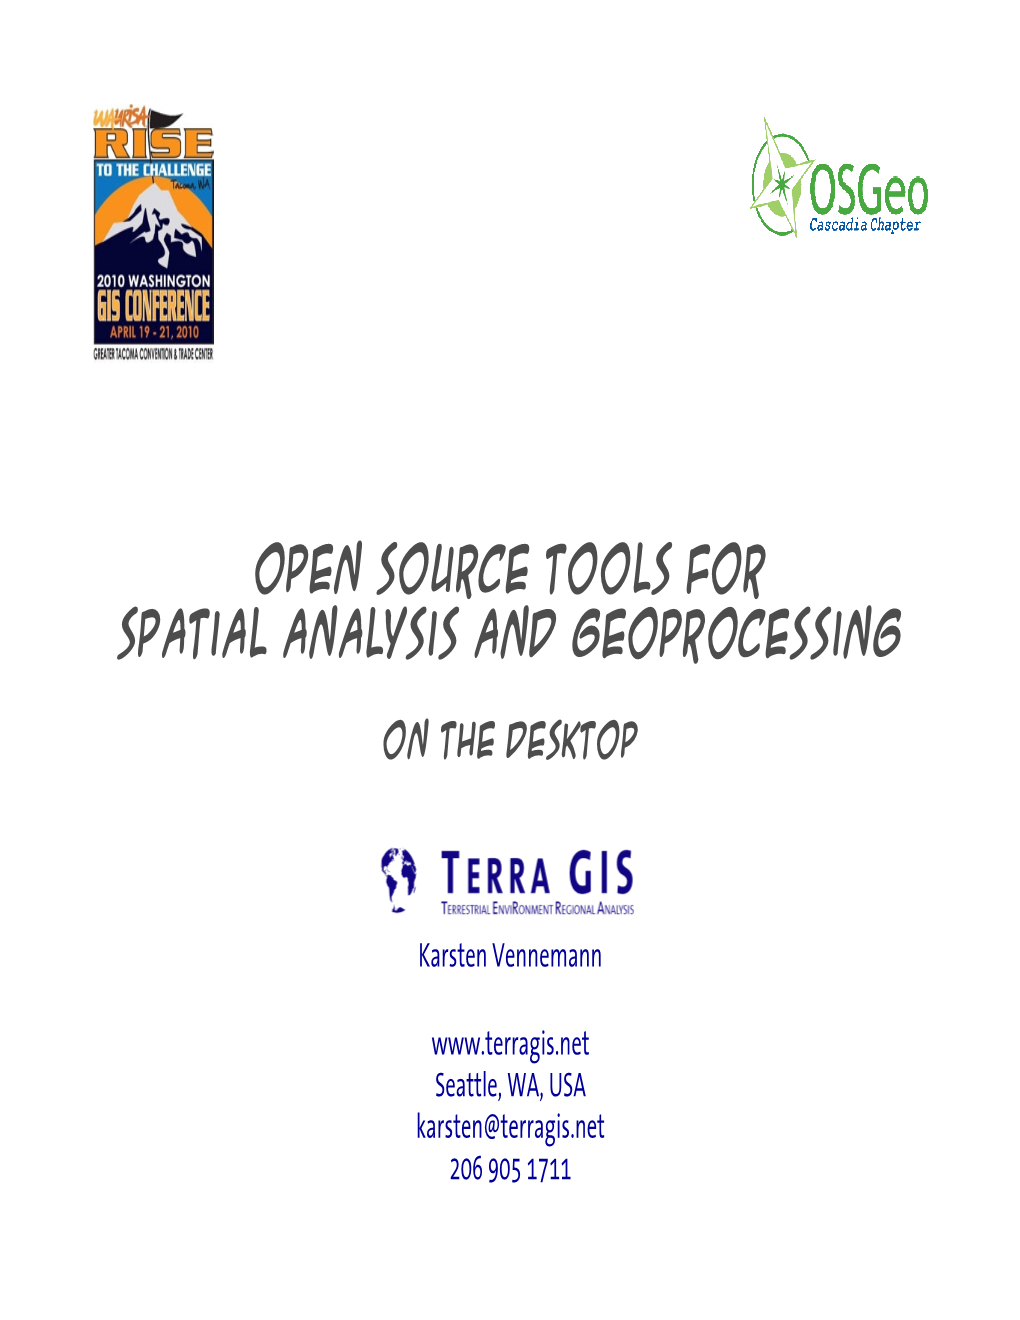 Open Source Tools for Spatial Analysis and Geoprocessing